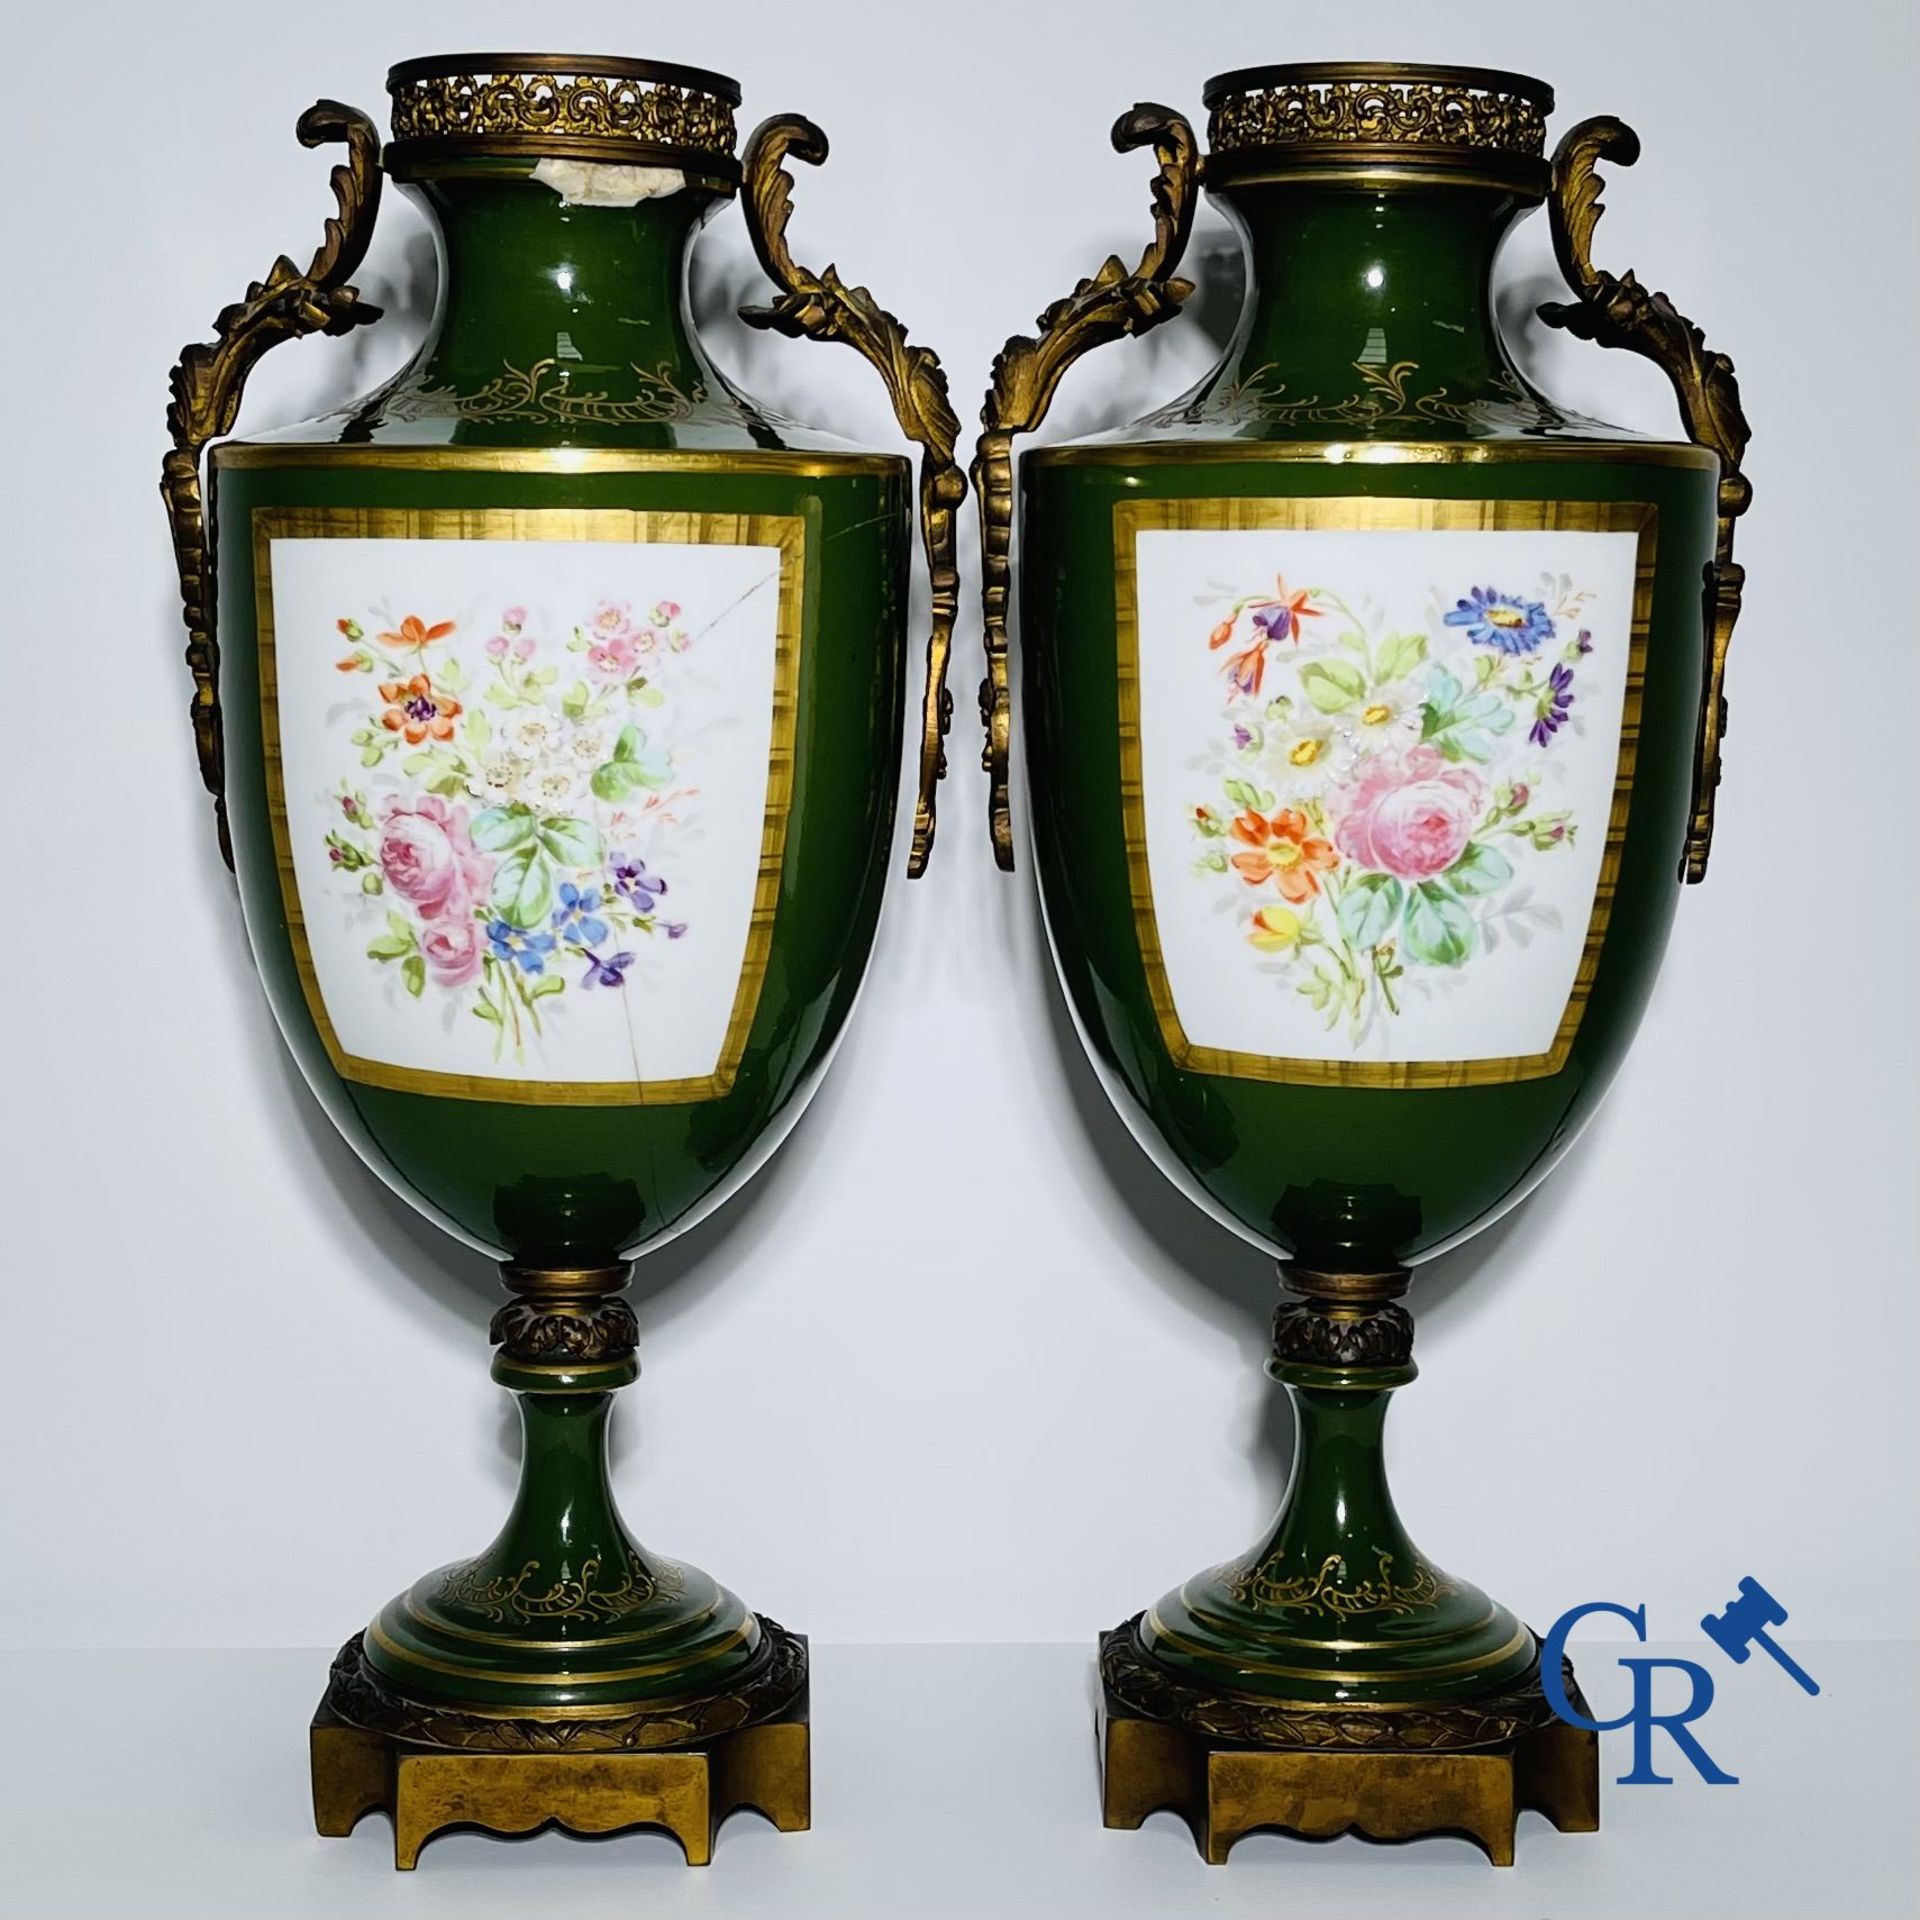 Sèvres: Pair of vases in Sevres porcelain and bronze. signed Leduc. - Image 7 of 7